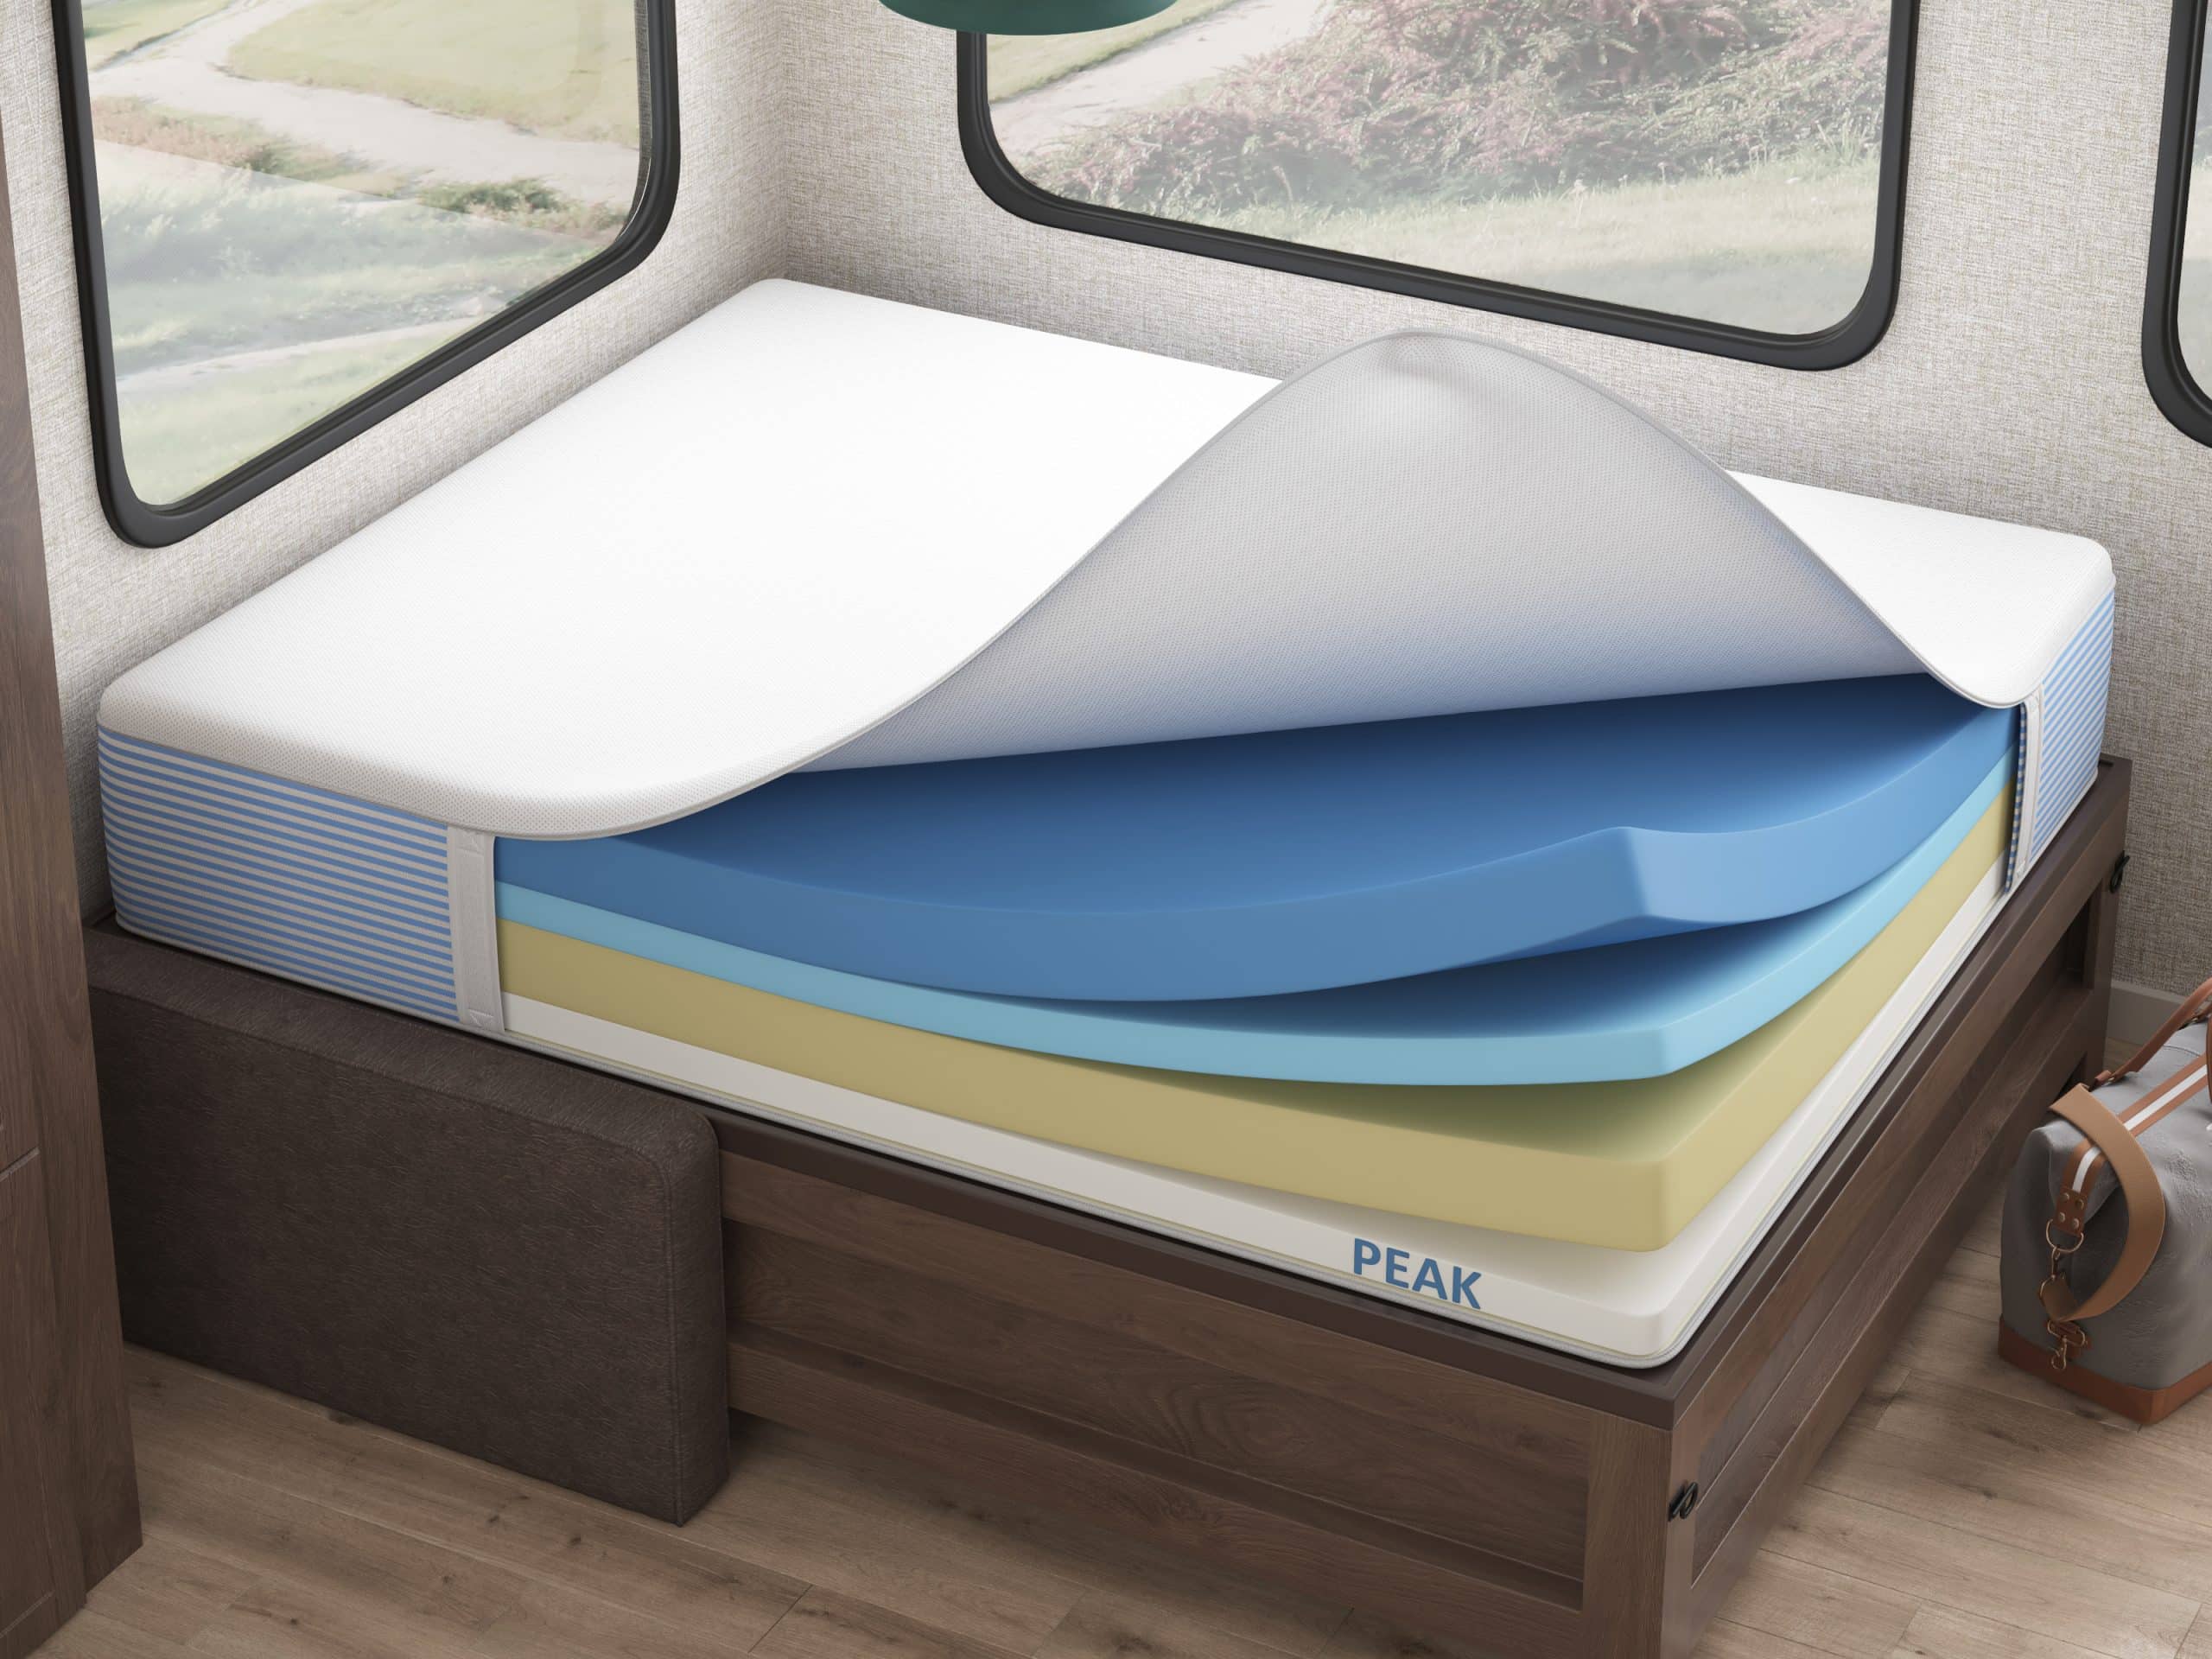 Peak 6" Mattress for use in Motorhomes and Campers